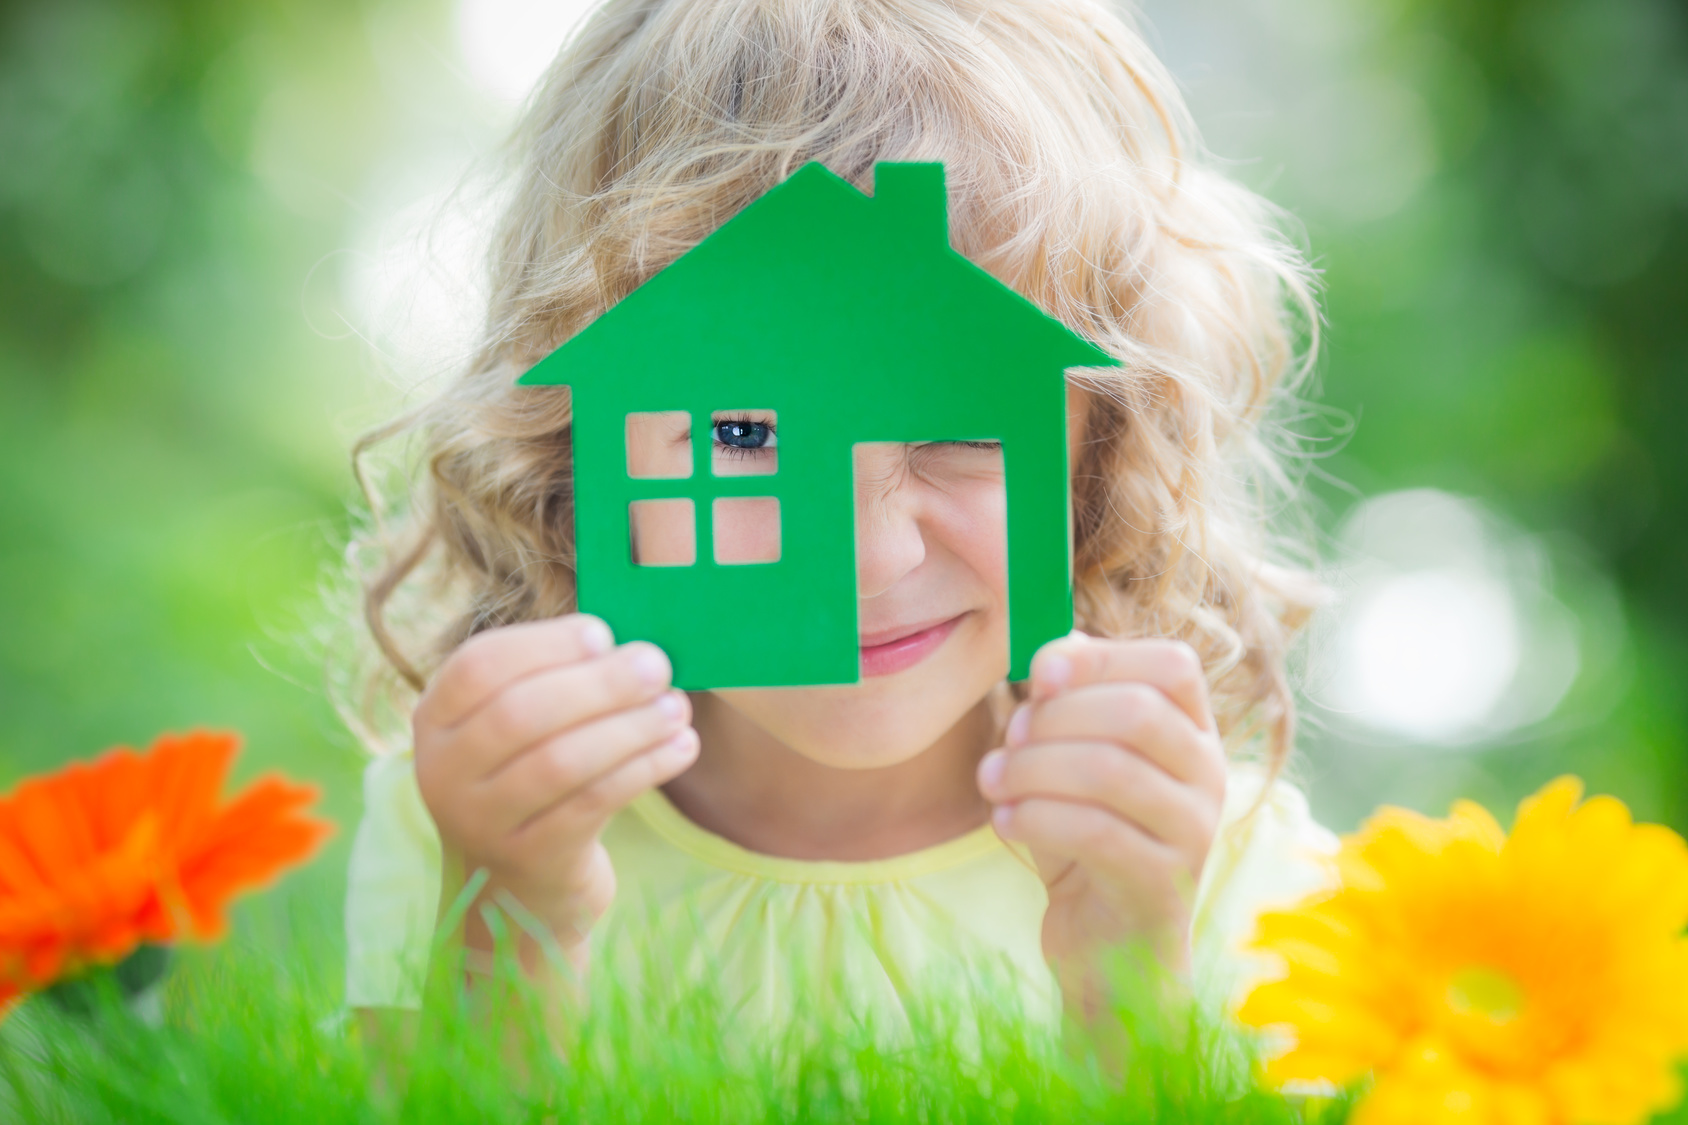 Small girl looking through green paper house with flowers surround